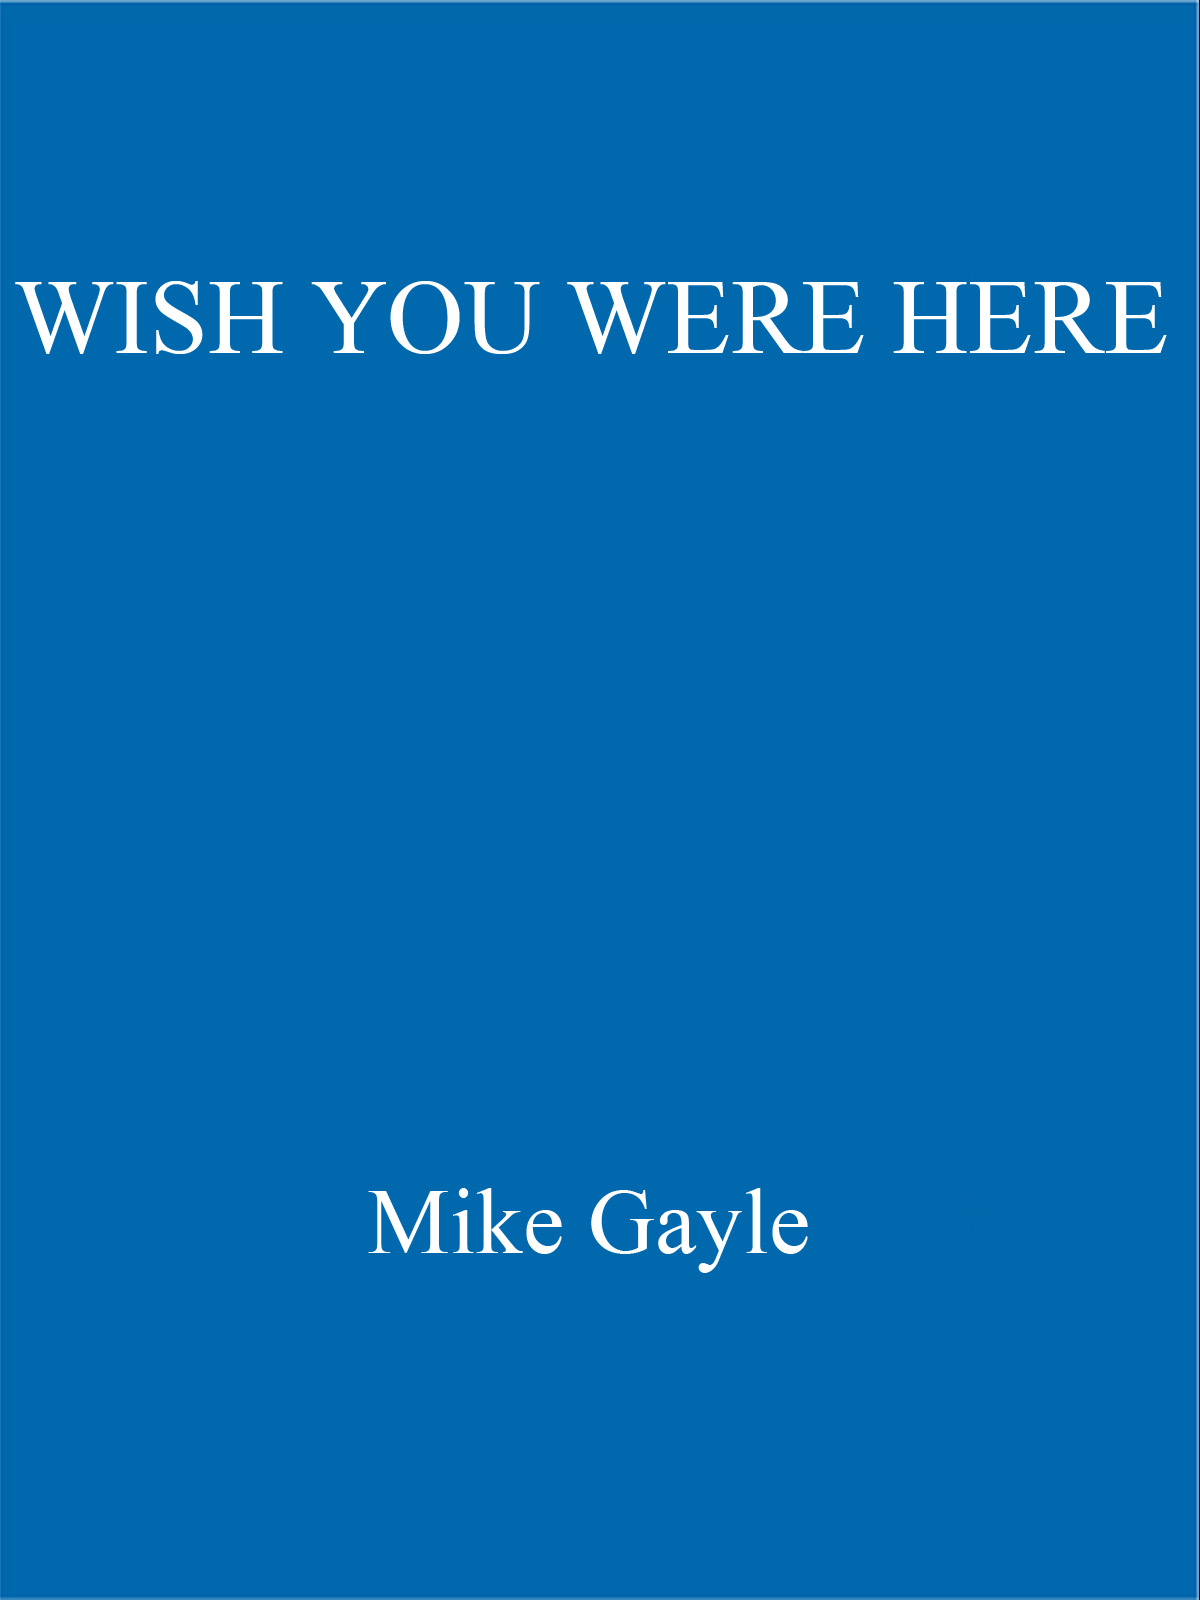 Wish You Were Here by Mike Gayle